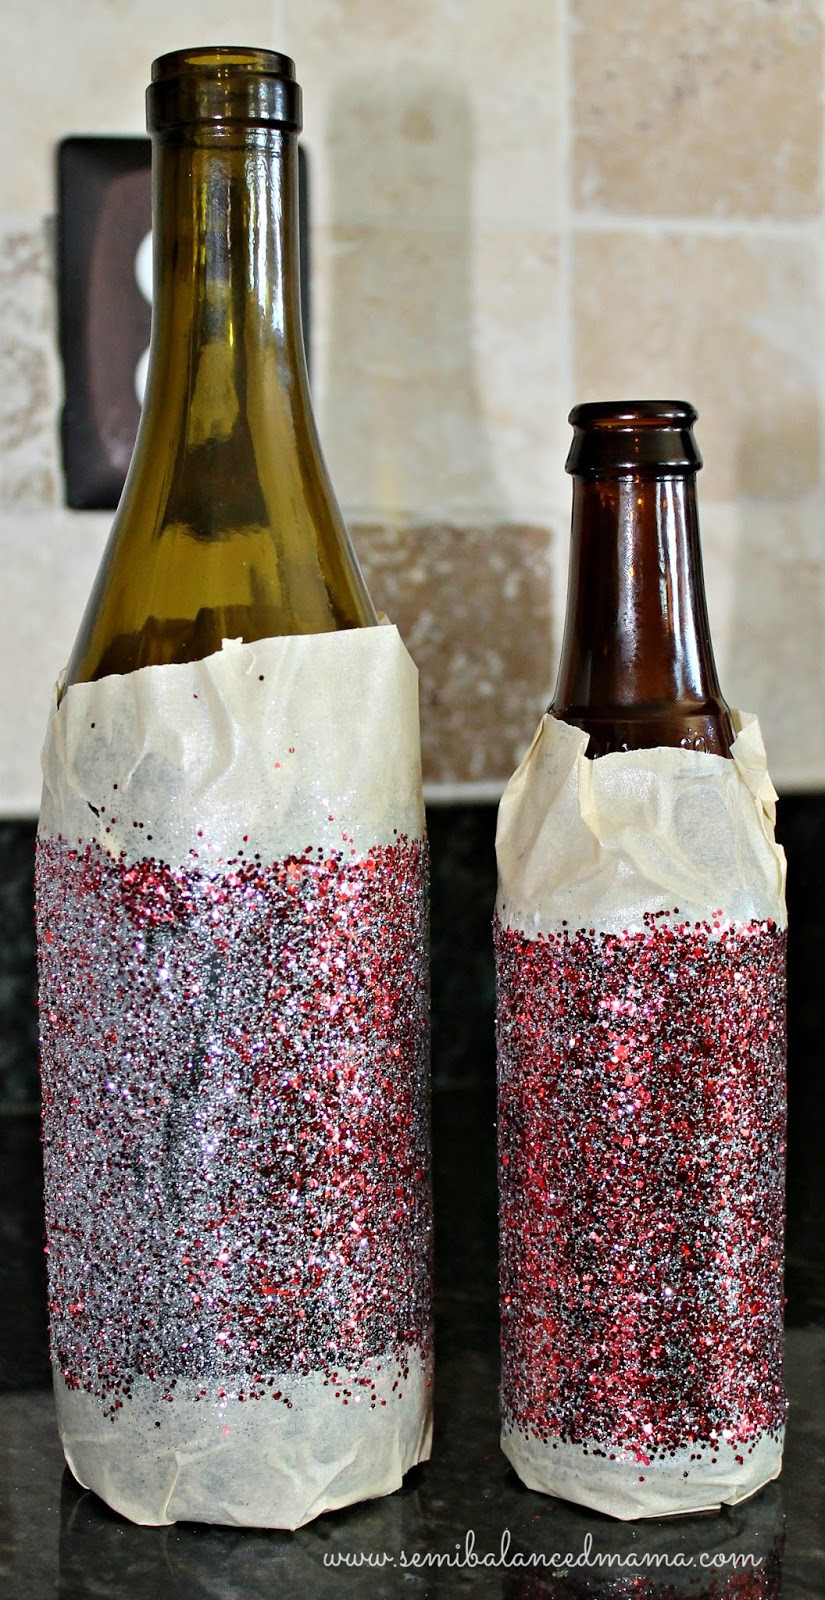 28 Elegant Mod Podge Glitter Vase 2024 free download mod podge glitter vase of the glitter trials the semibalancedmama for apply the sealant to the glitter area make sure to only apply on the glitter and not that area that is bare without tape